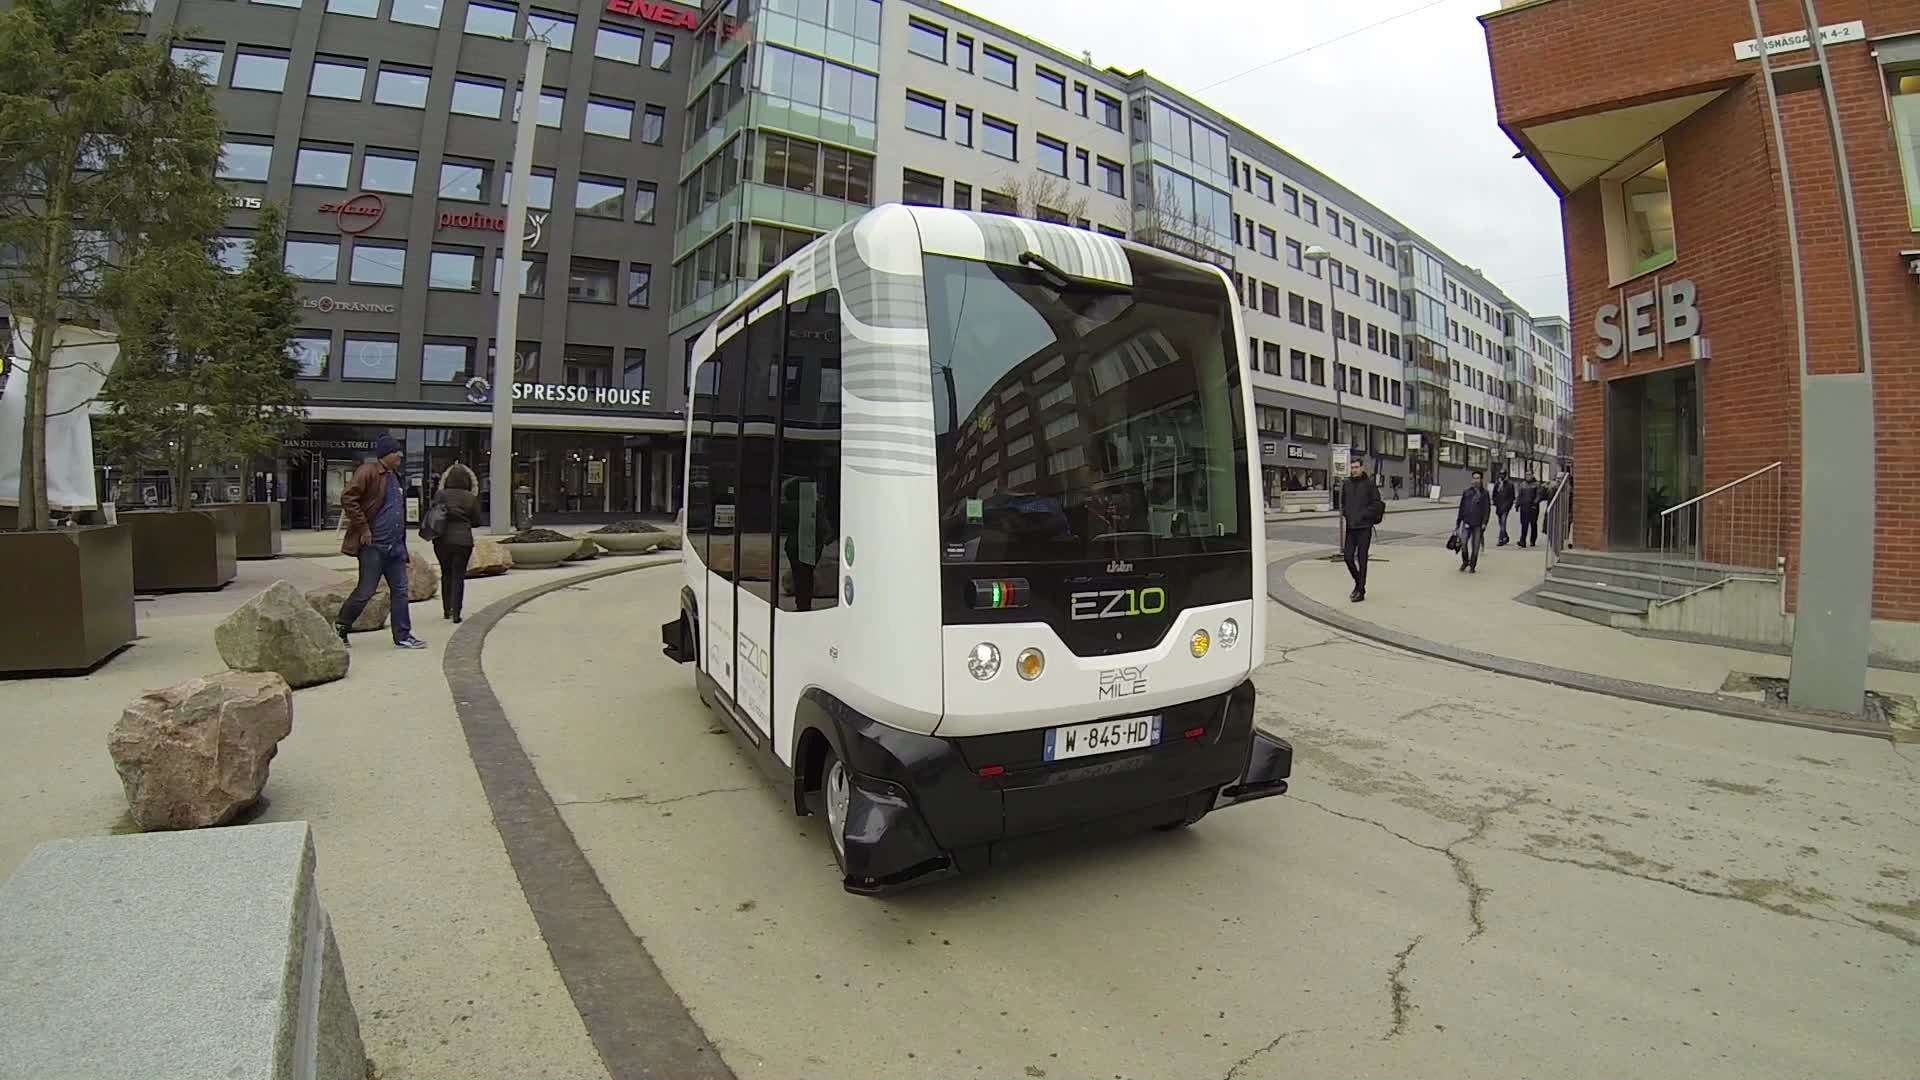 the driverless bus